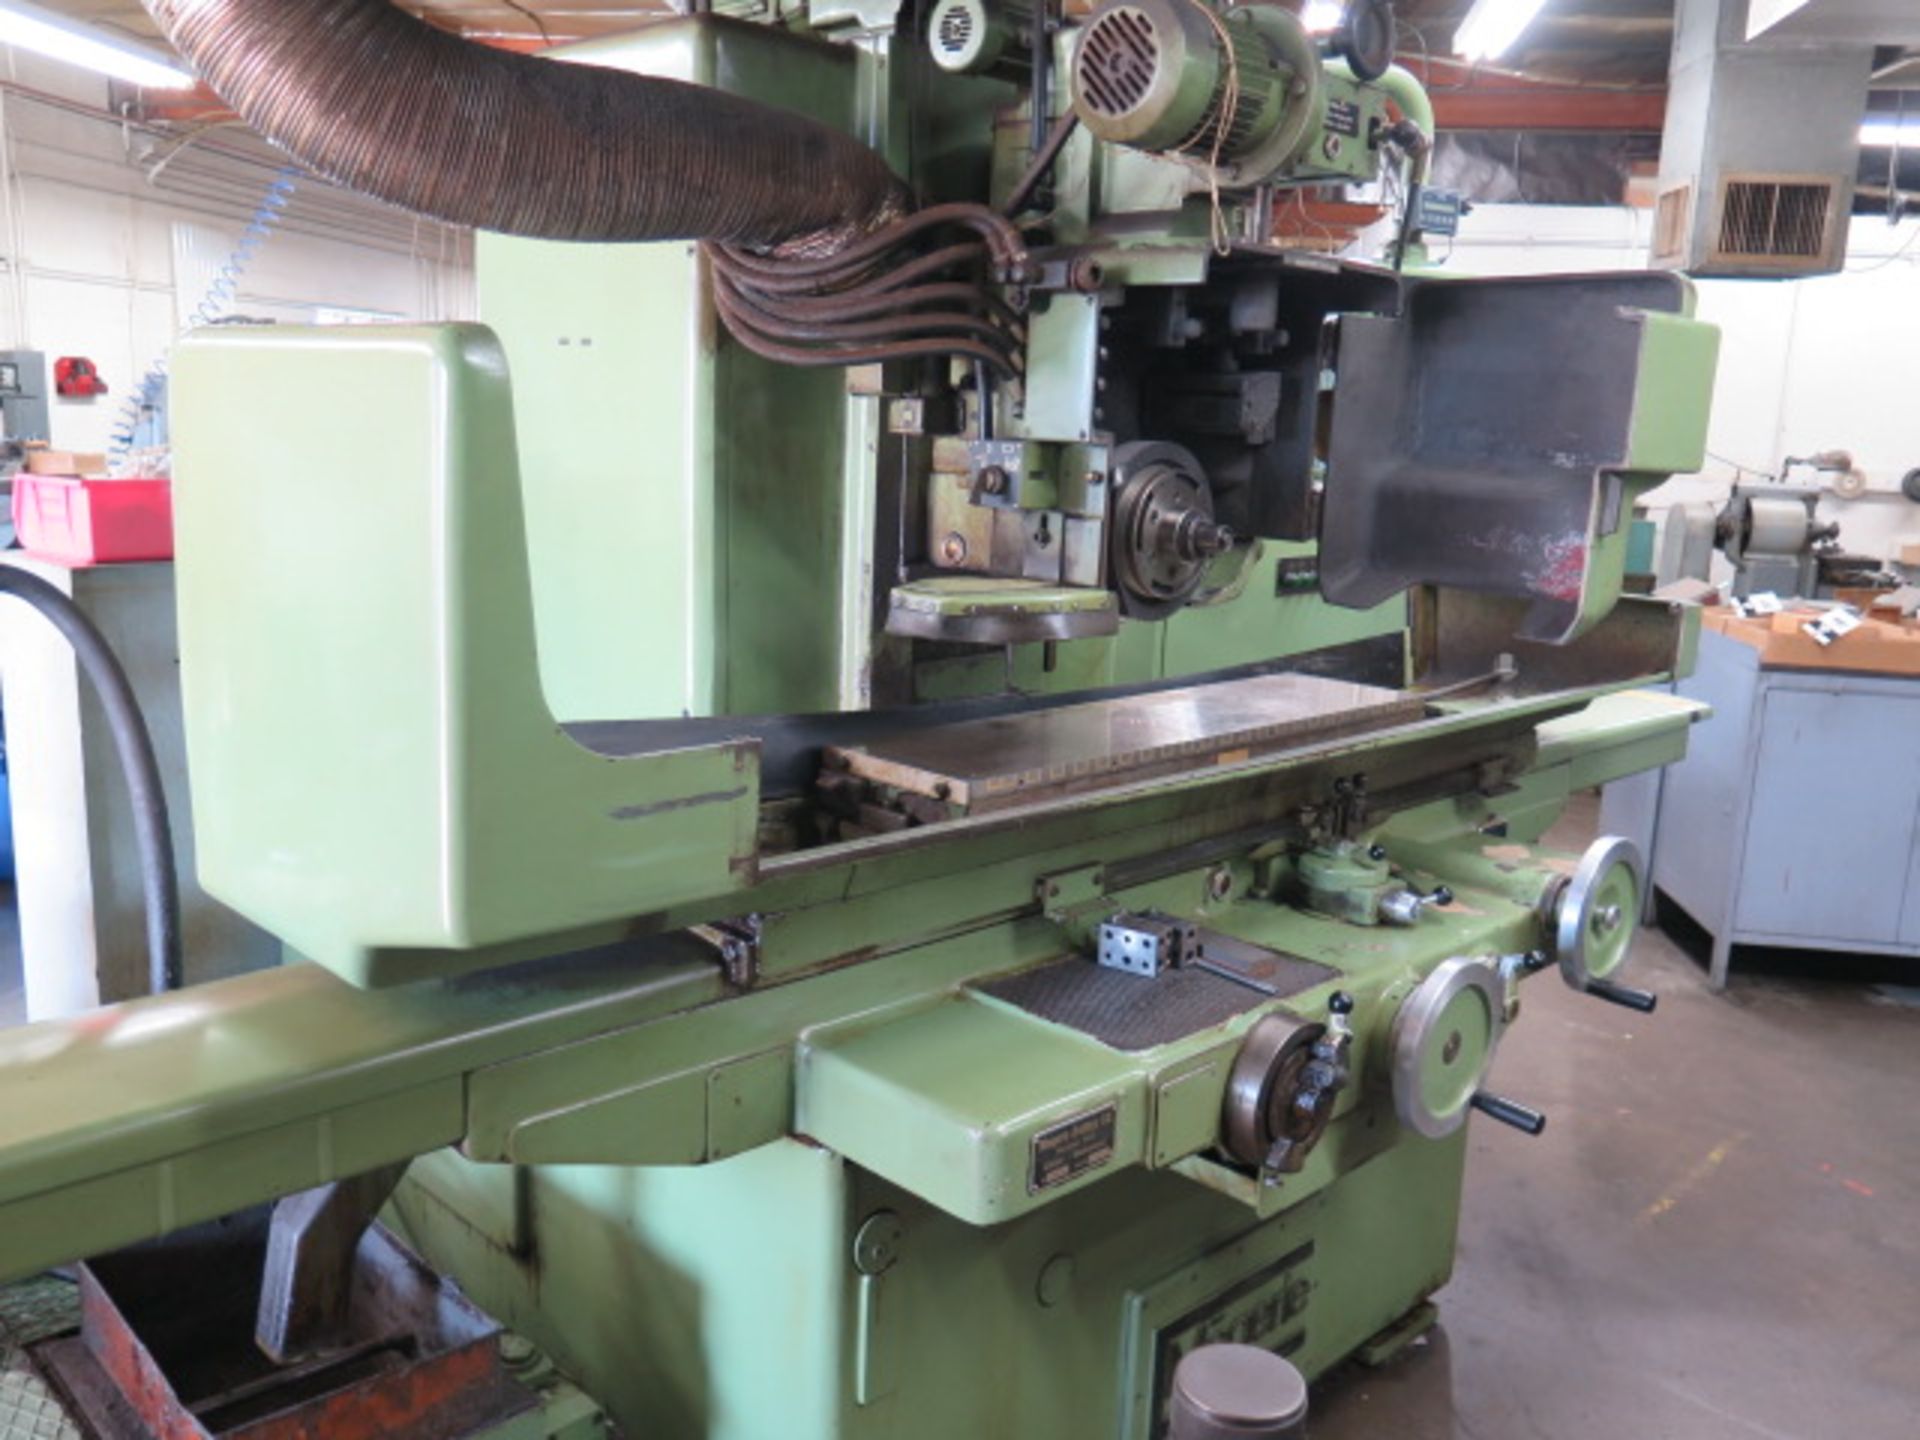 Magerle Type FP-10-S1 10" x 40" Auto Hydr Surface Grinder s/n 965 w/ Magerle Controls, SOLD AS IS - Image 2 of 22